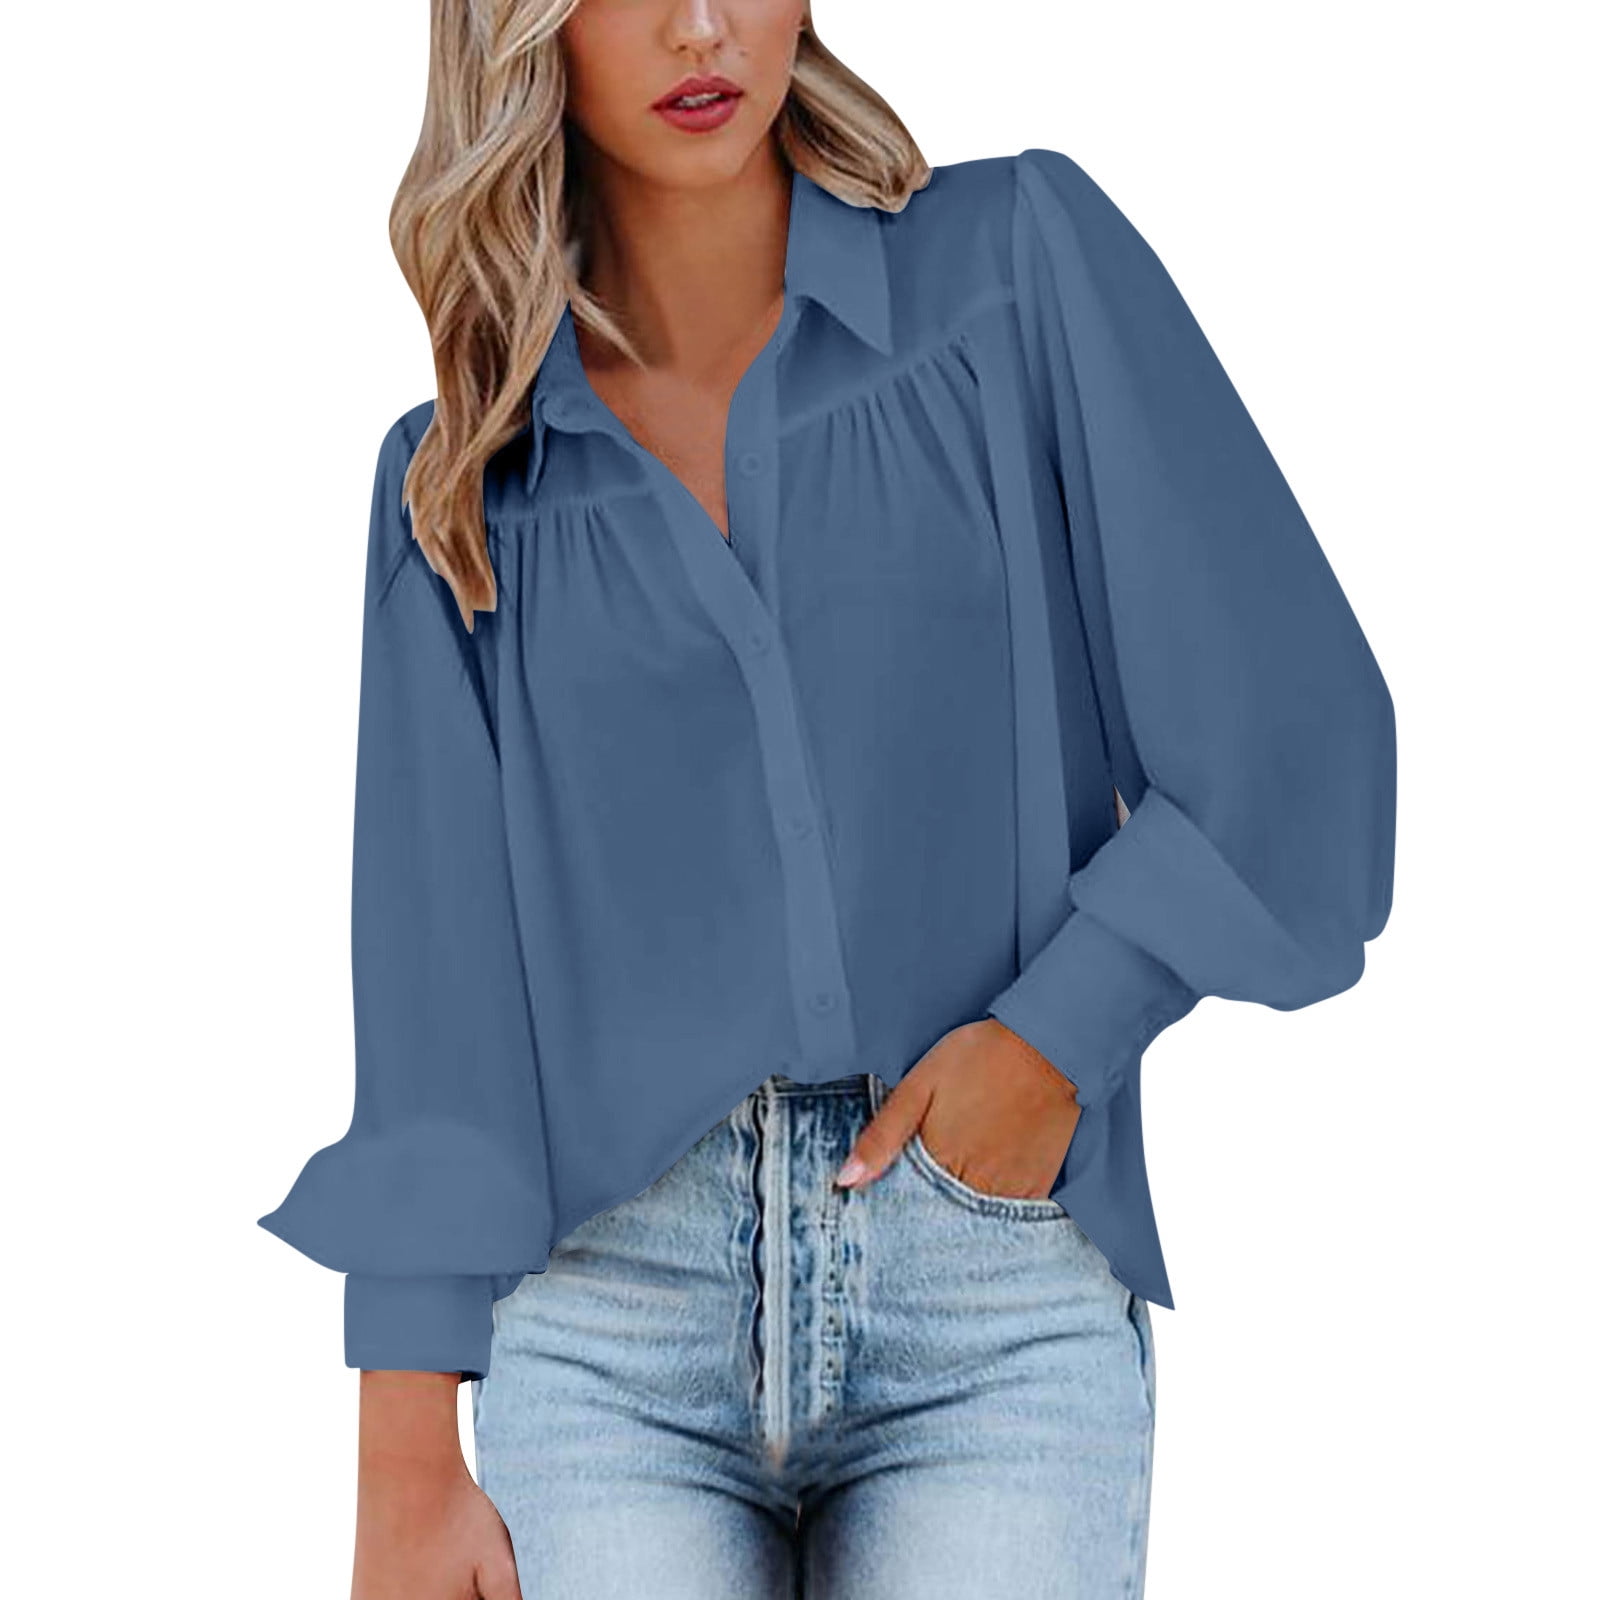 KaLI_store Short Sleeve Shirts for Women Womens Button Down Shirts Stretchy  Long Sleeve Basic Work Formal Casual Blouse Blue,M